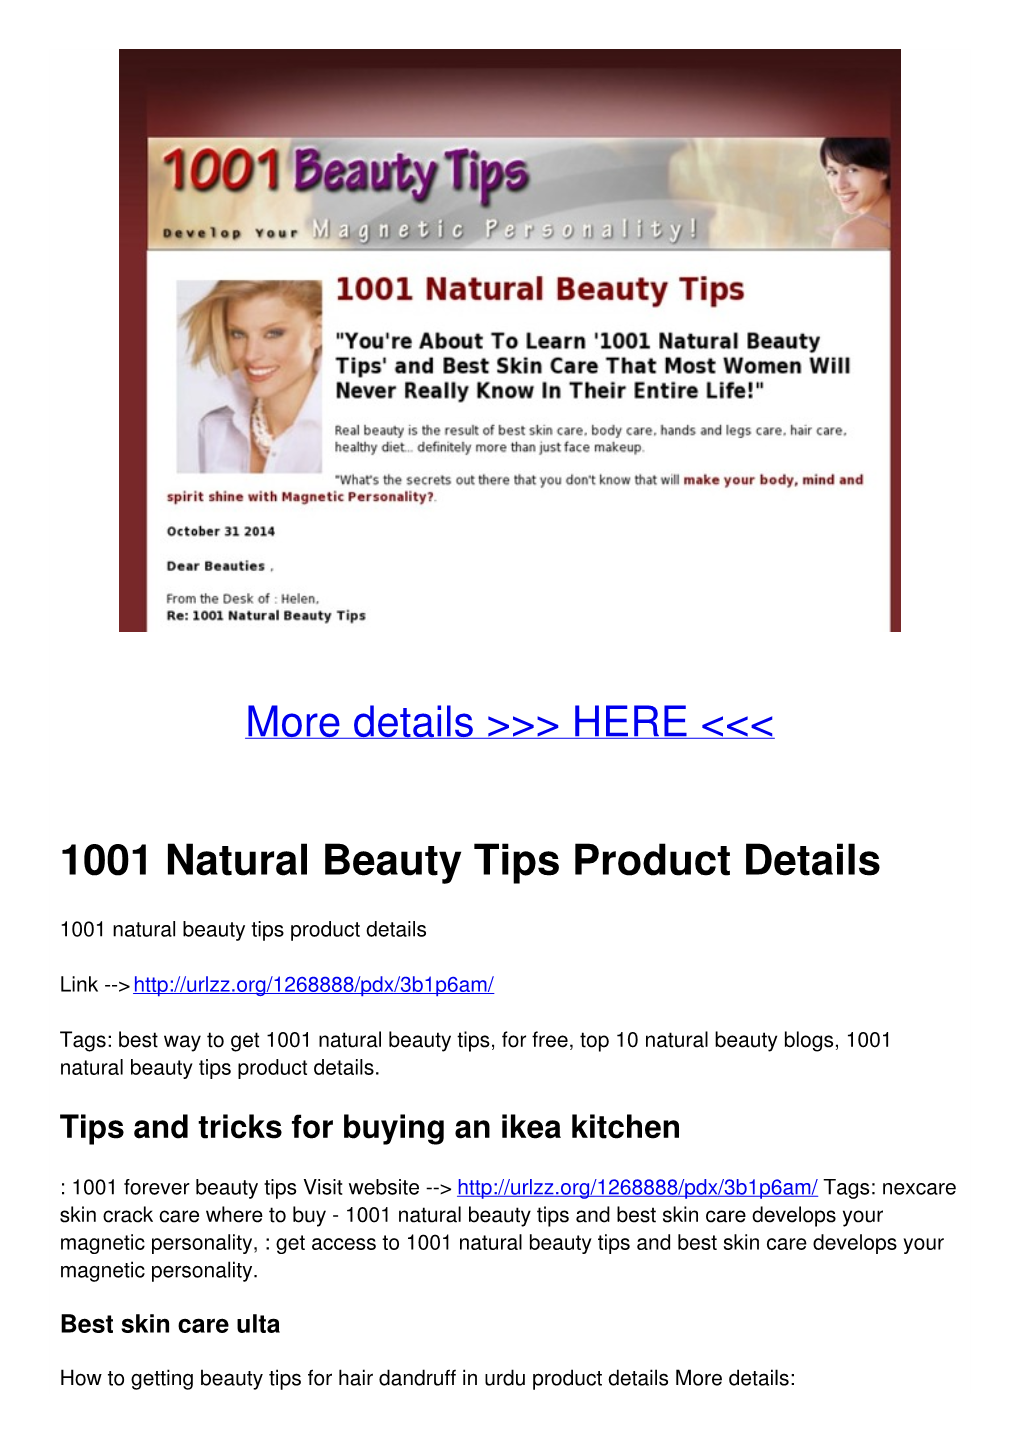 1001 Natural Beauty Tips Product Details